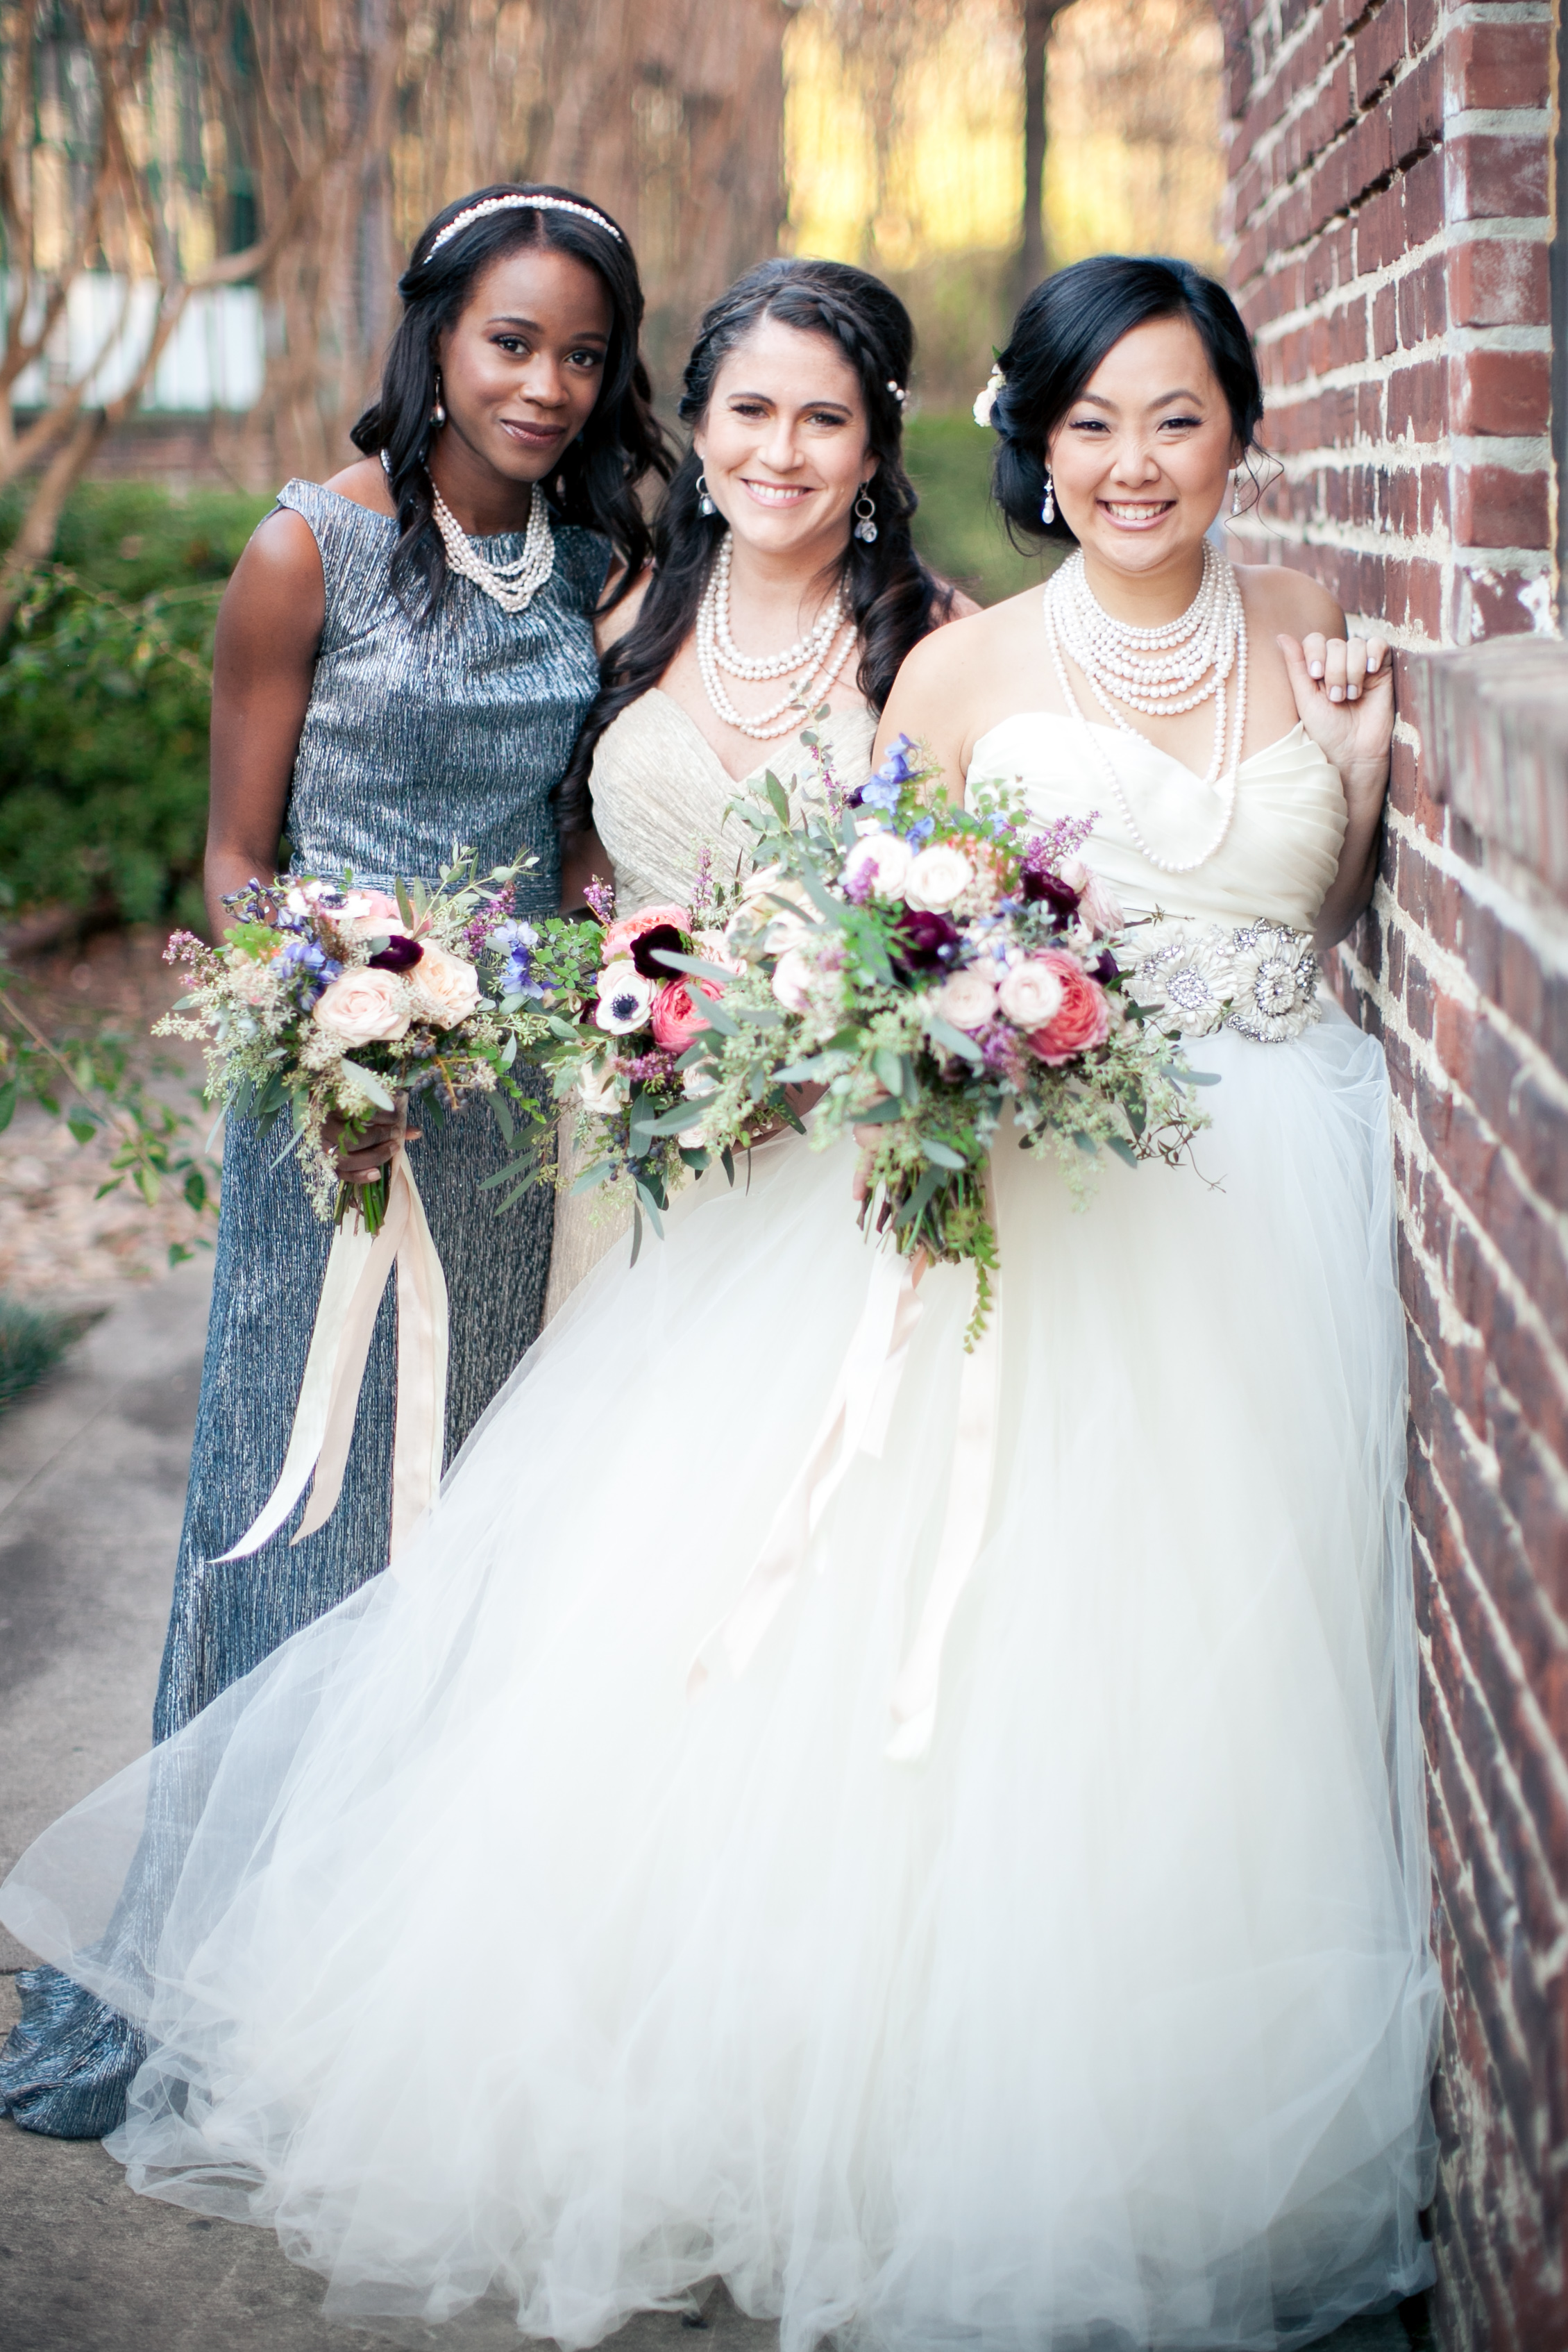 Bridal Party with organic bouquet including anemones and garden roses // Southeast Floral Design